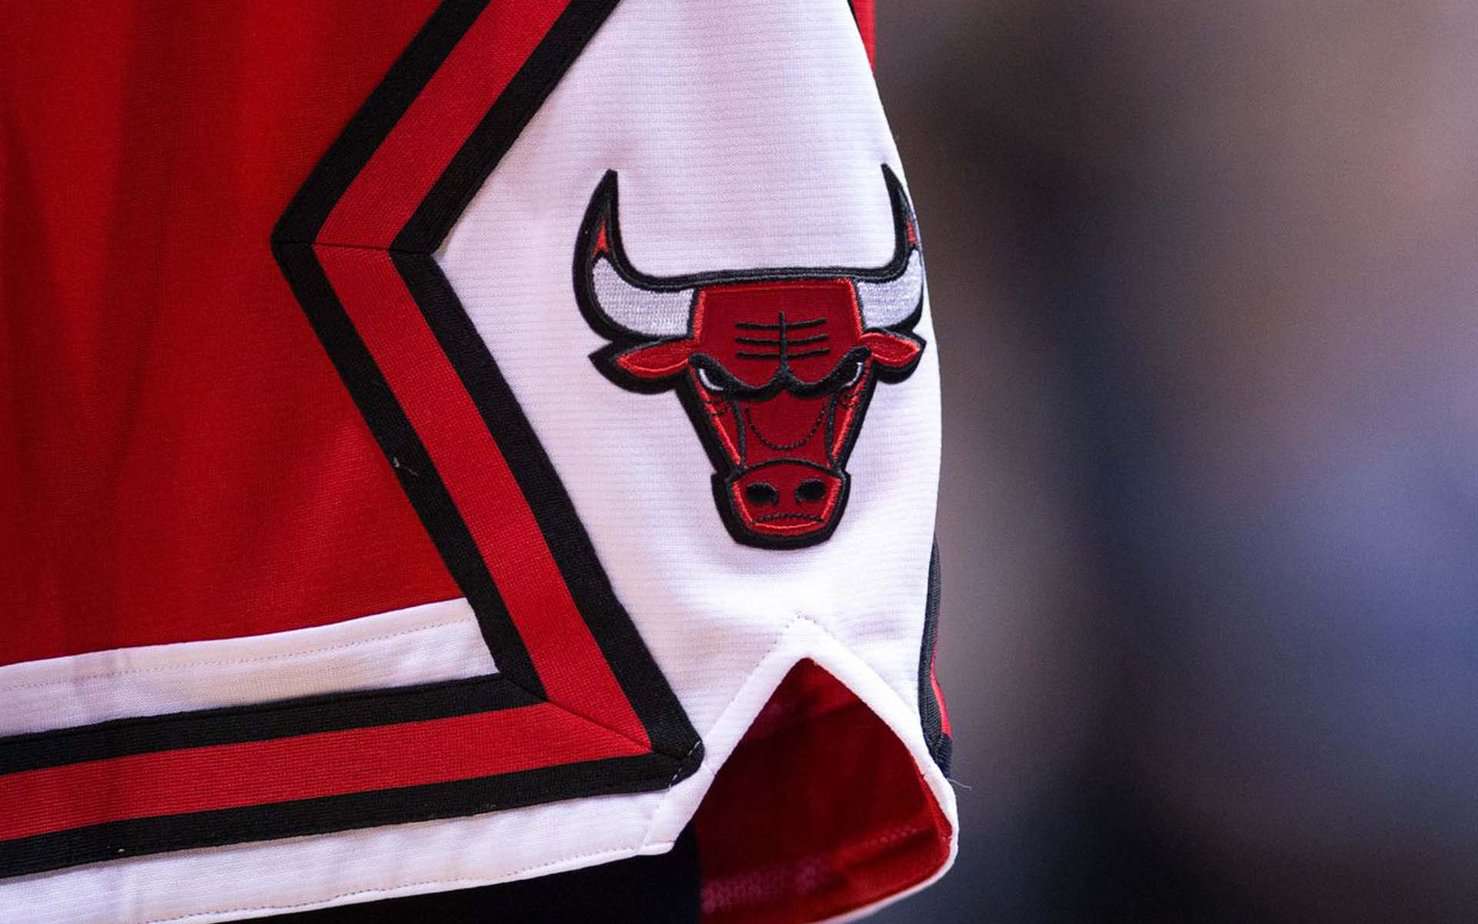 Chicago Bulls Hires First Black Manager - Marc Eversley Steps up to the position!